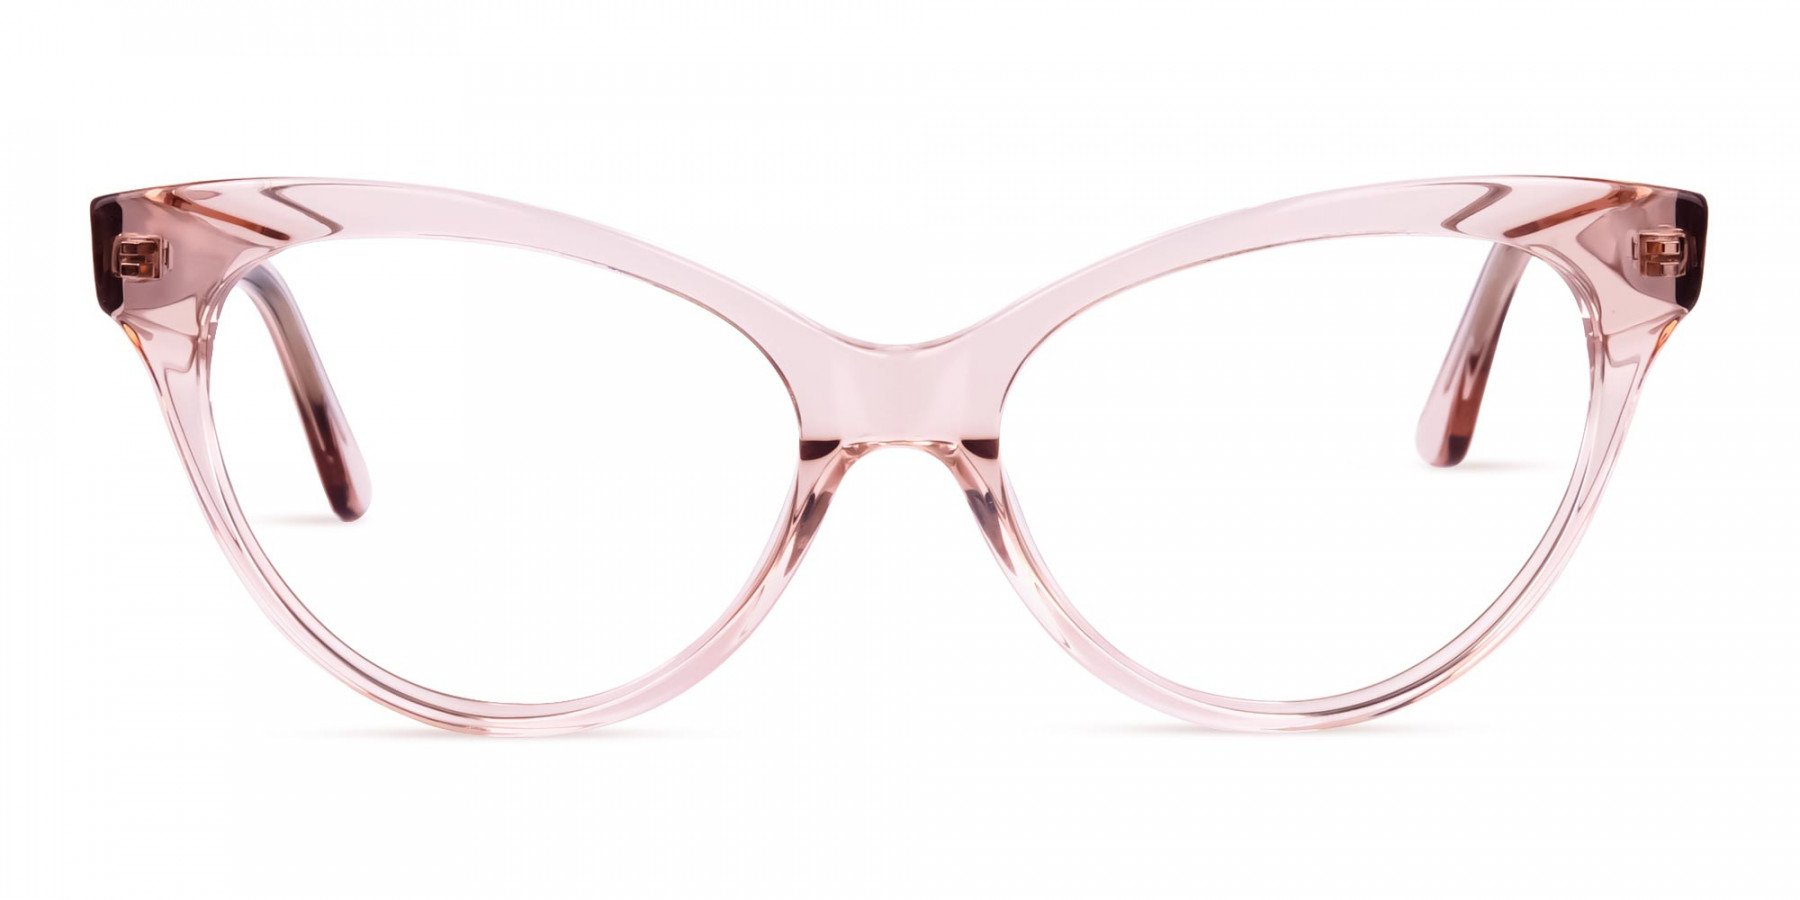 Crystal-and-Nude-Cat-Eye-Glasses-1